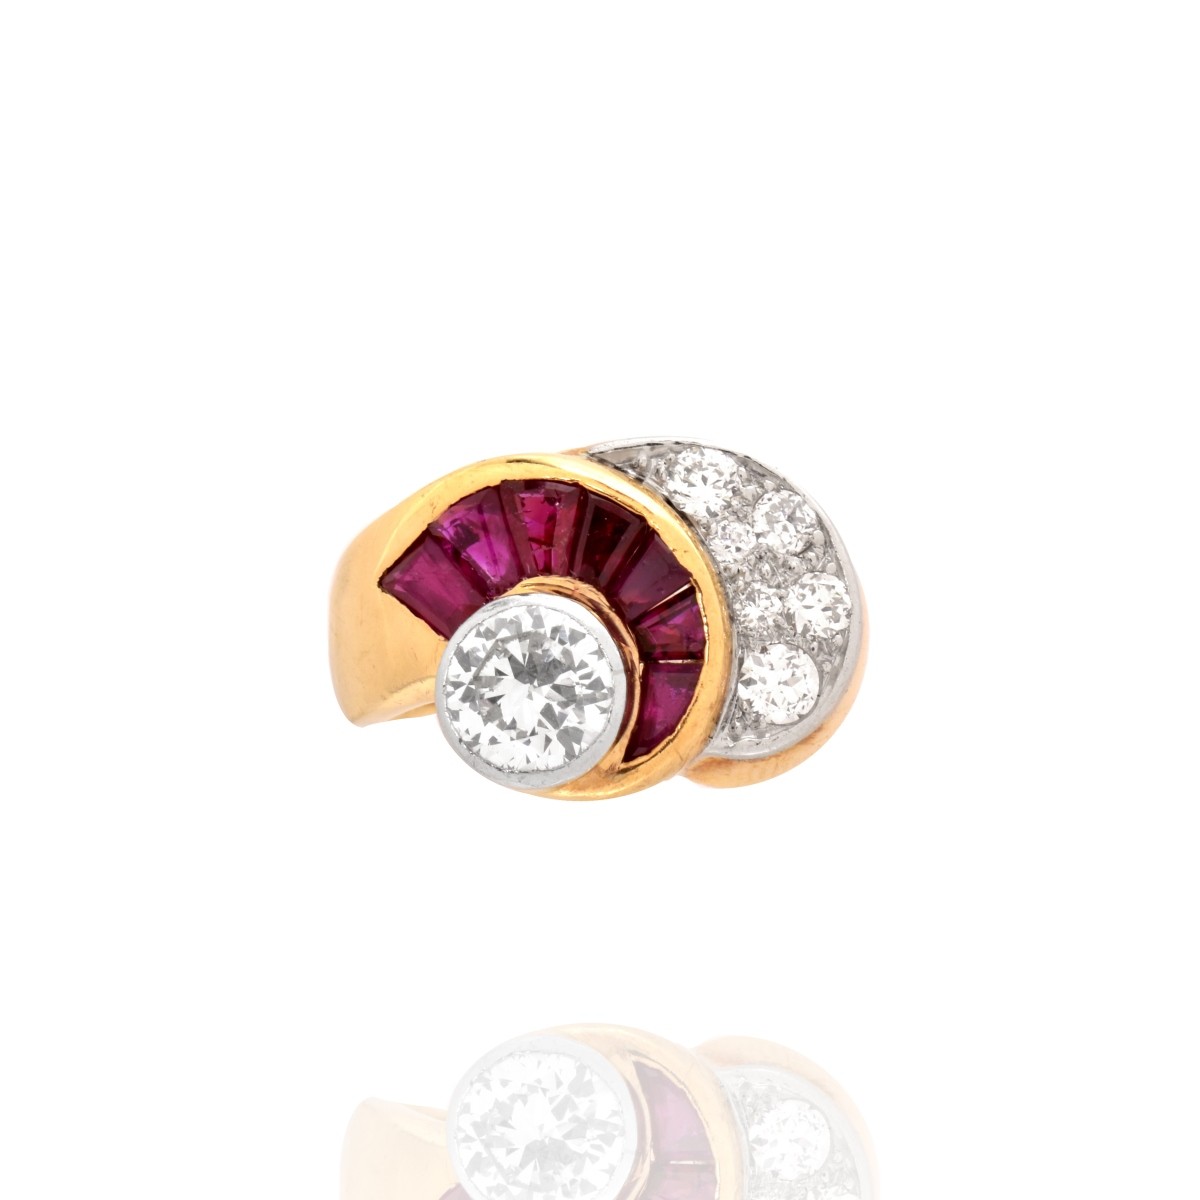 Diamond, Ruby and 14k Ring